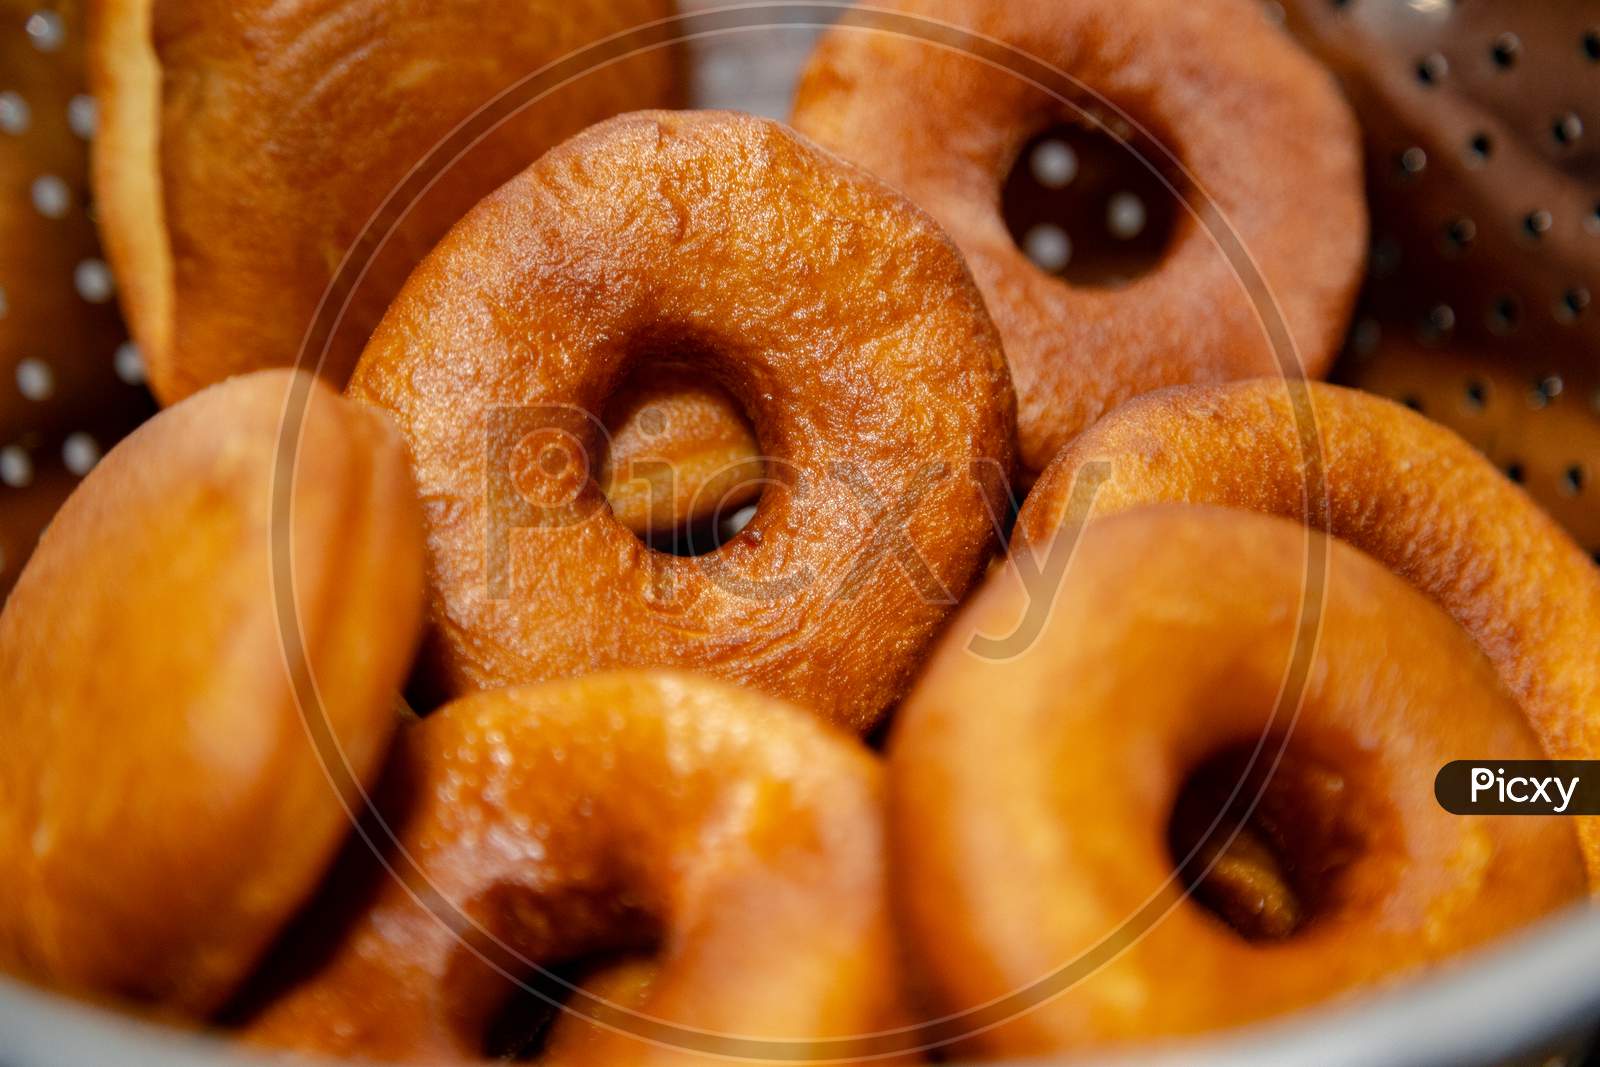 Fresh, Golden Brown And Homely Cooked Donuts. Focused And Defocused Donuts